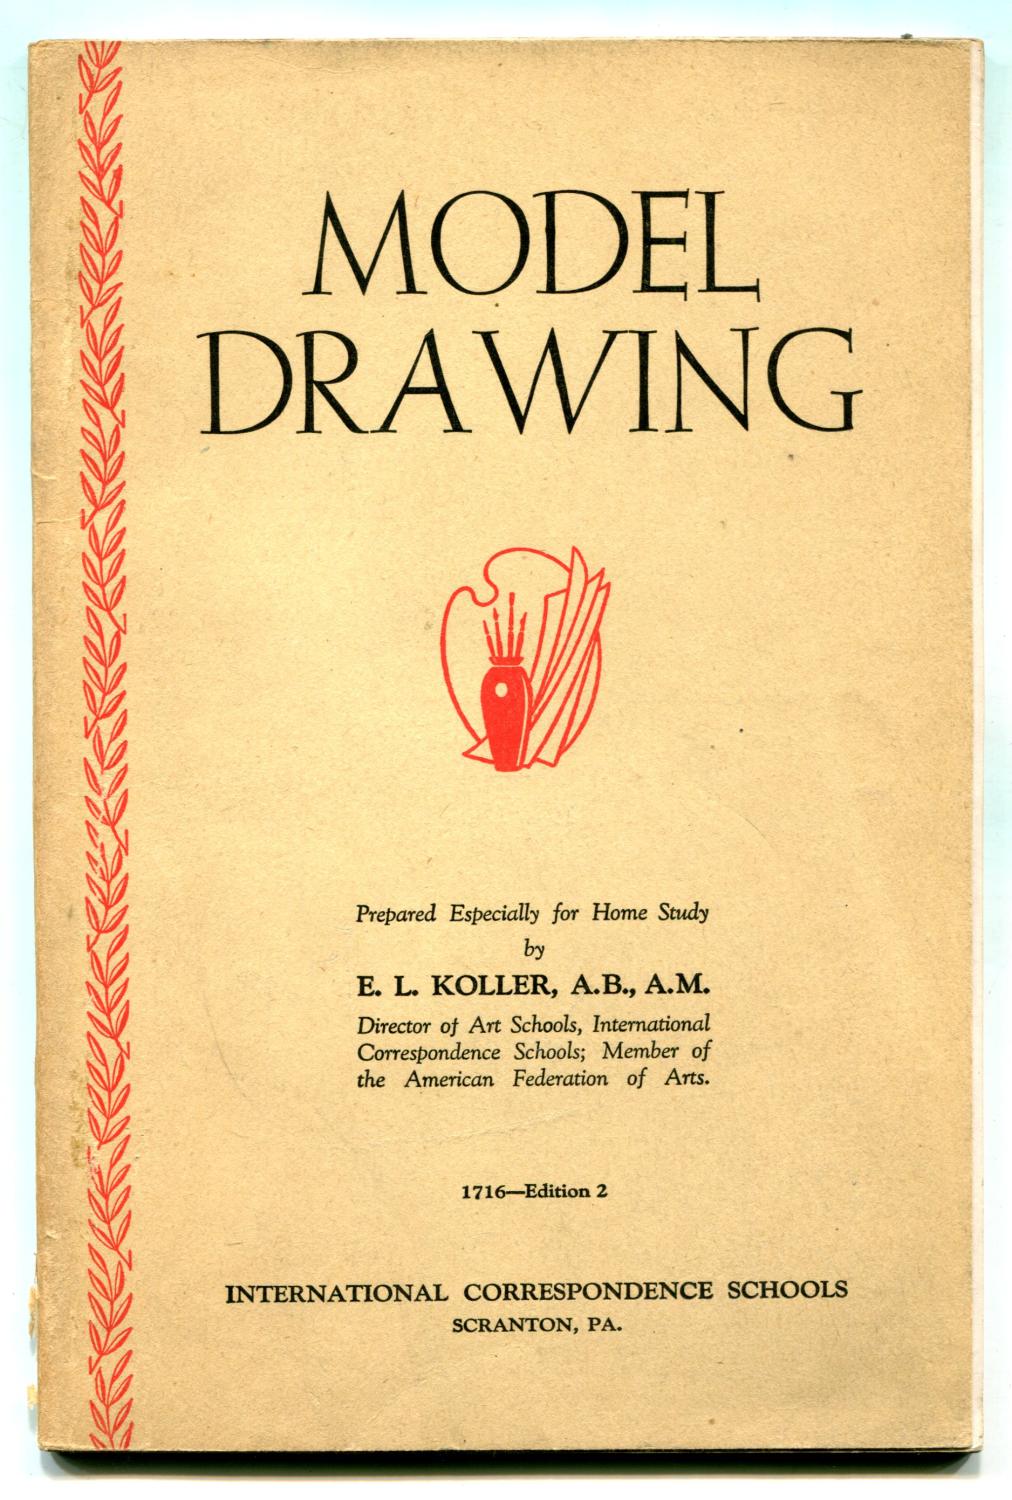 Keys to Drawing [Book]